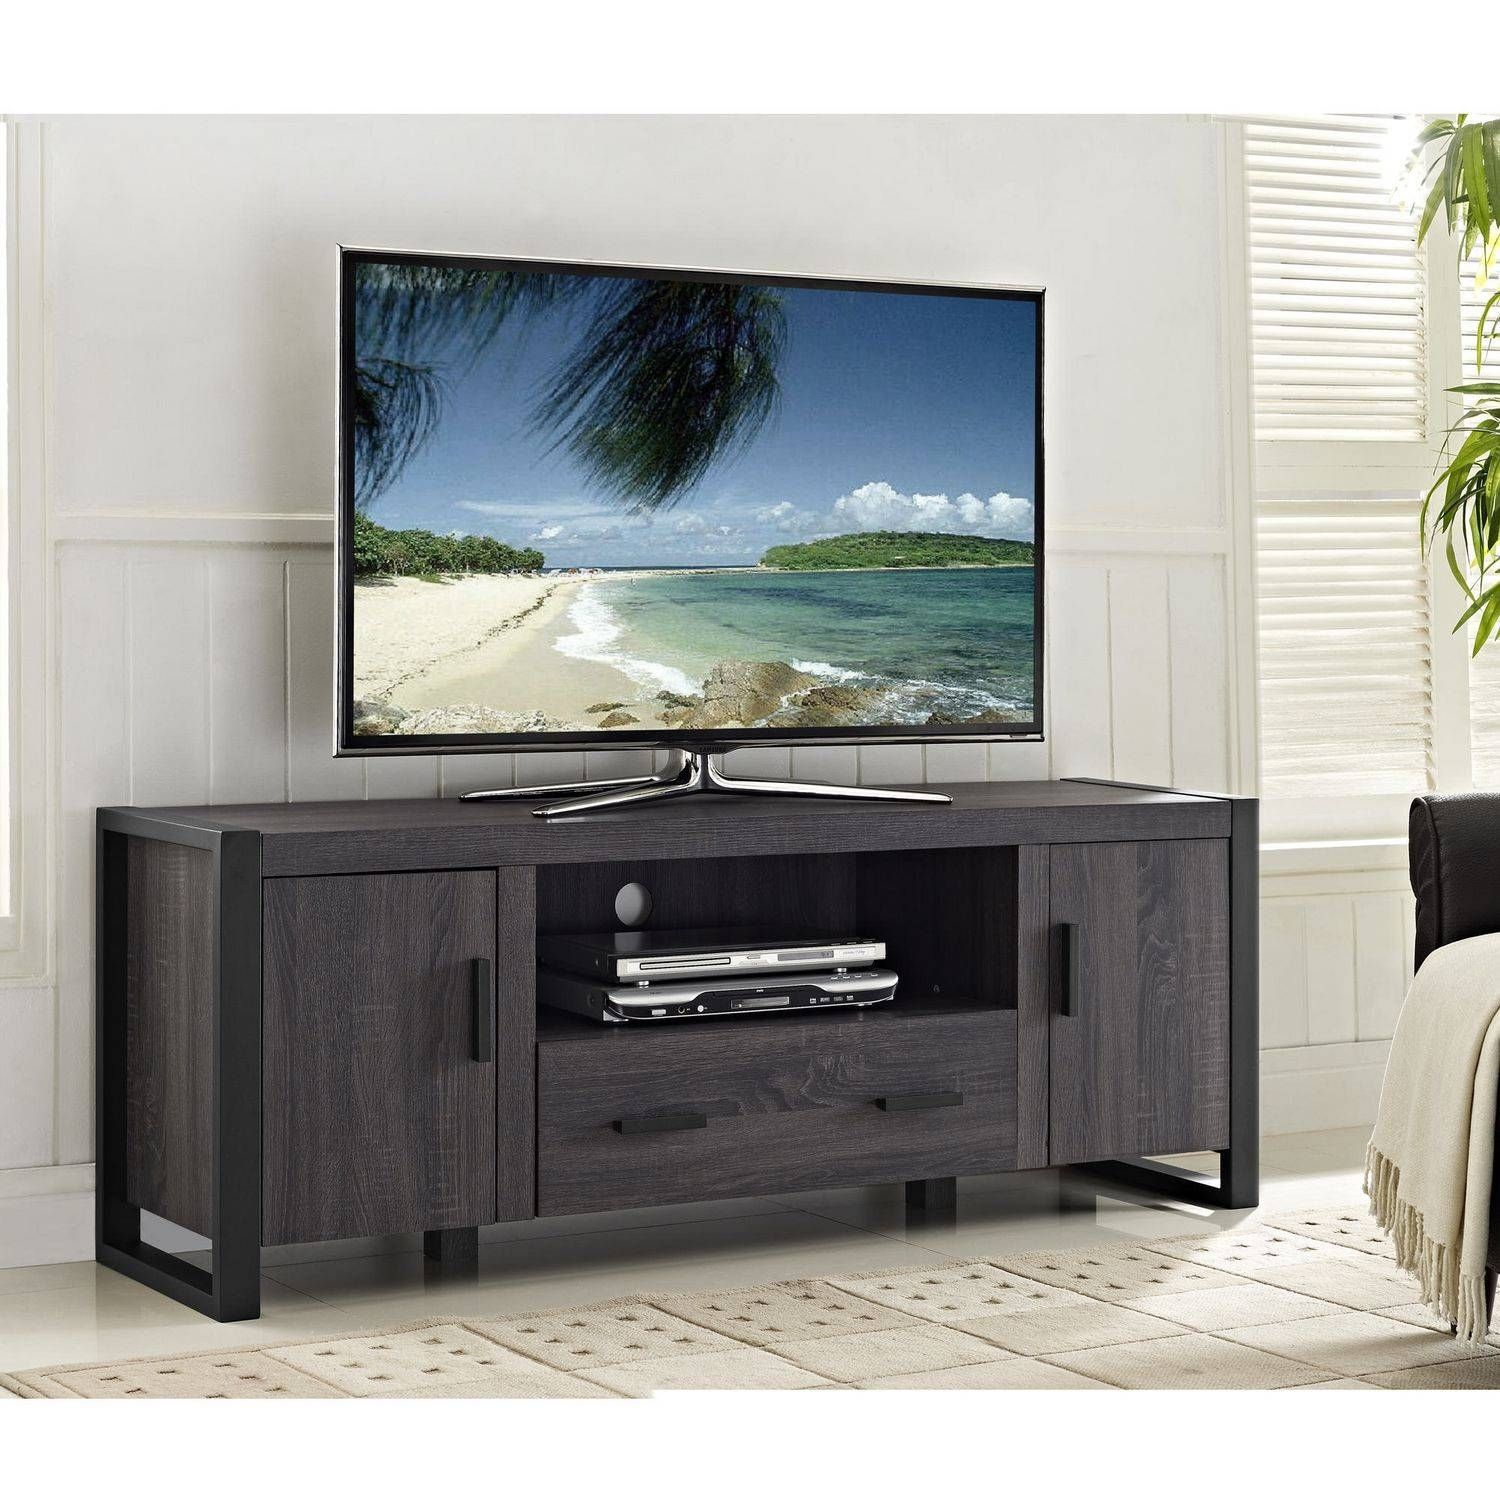 We Furniture 60" Grey Wood Tv Stand Console | Walmart Canada With Regard To Grey Wood Tv Stands (Photo 1 of 15)